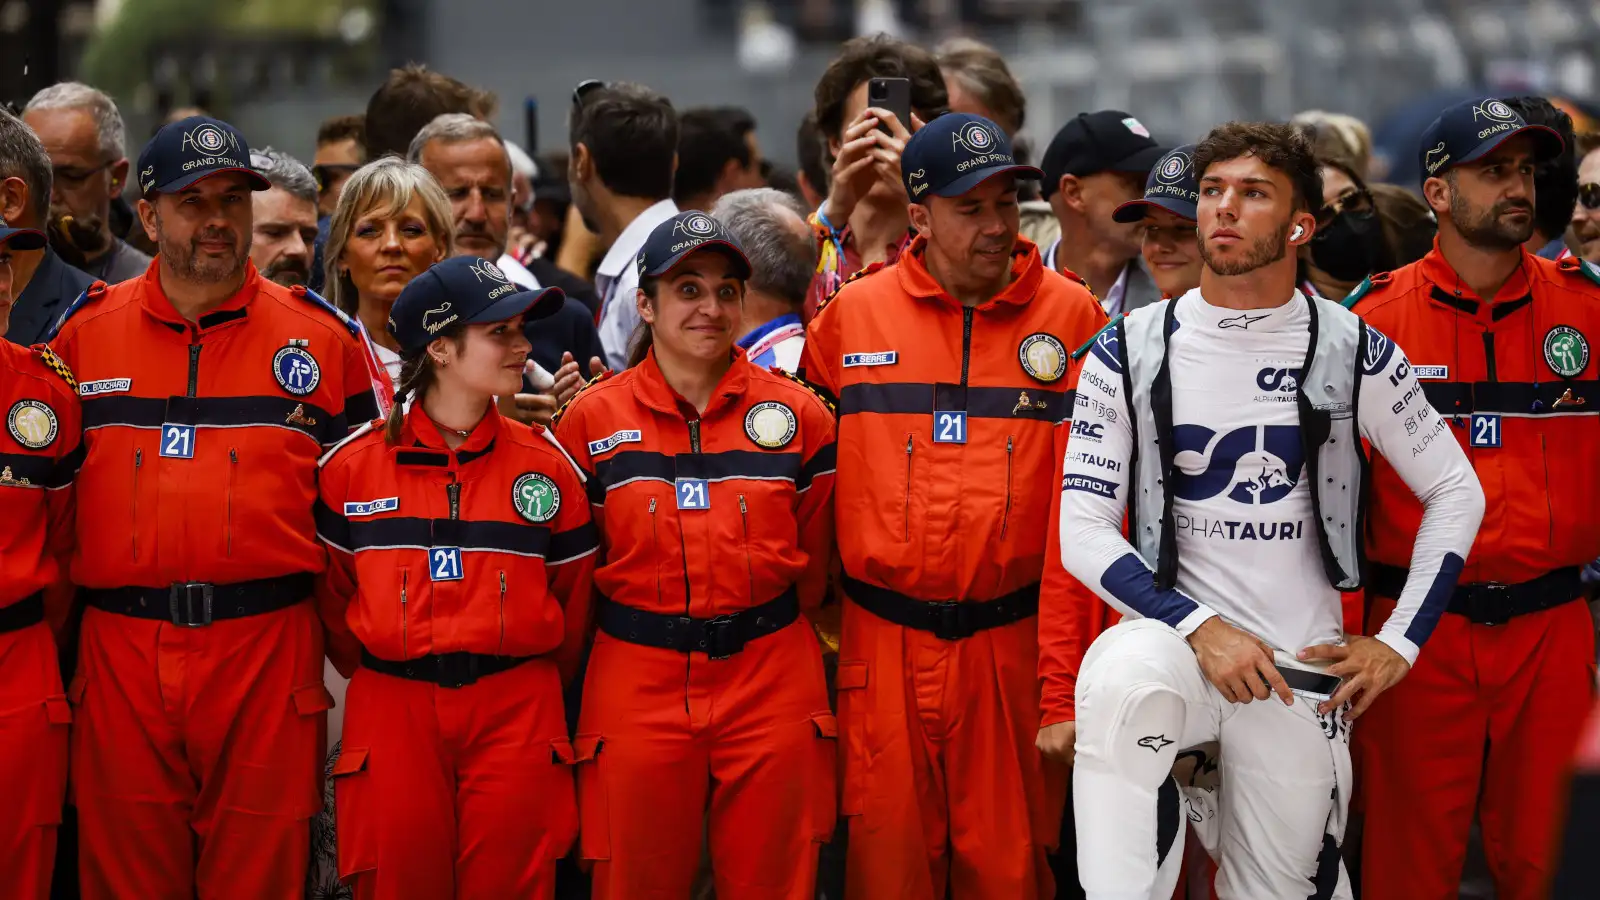 Pierre Gasly standing with the Monaco marshals. Monaco May 2022